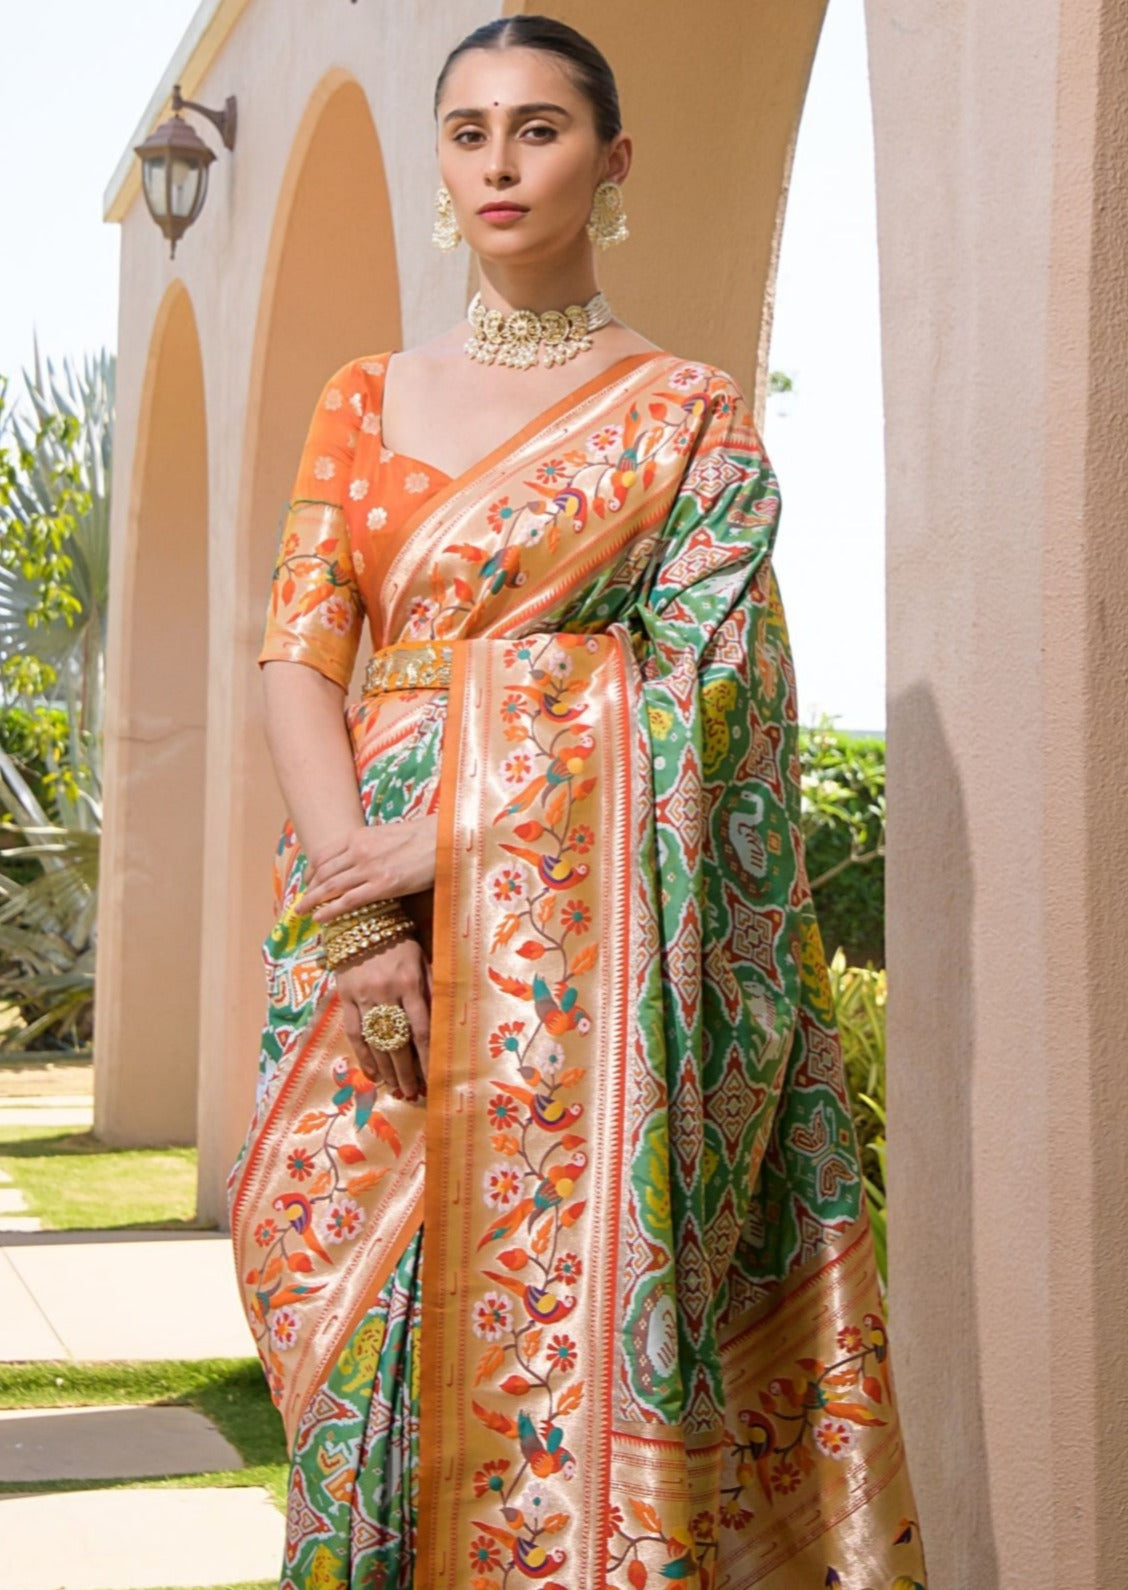 Usa patola paithani handloom silk original saree in green orange color combination online shopping with price and fast shipping to usa.